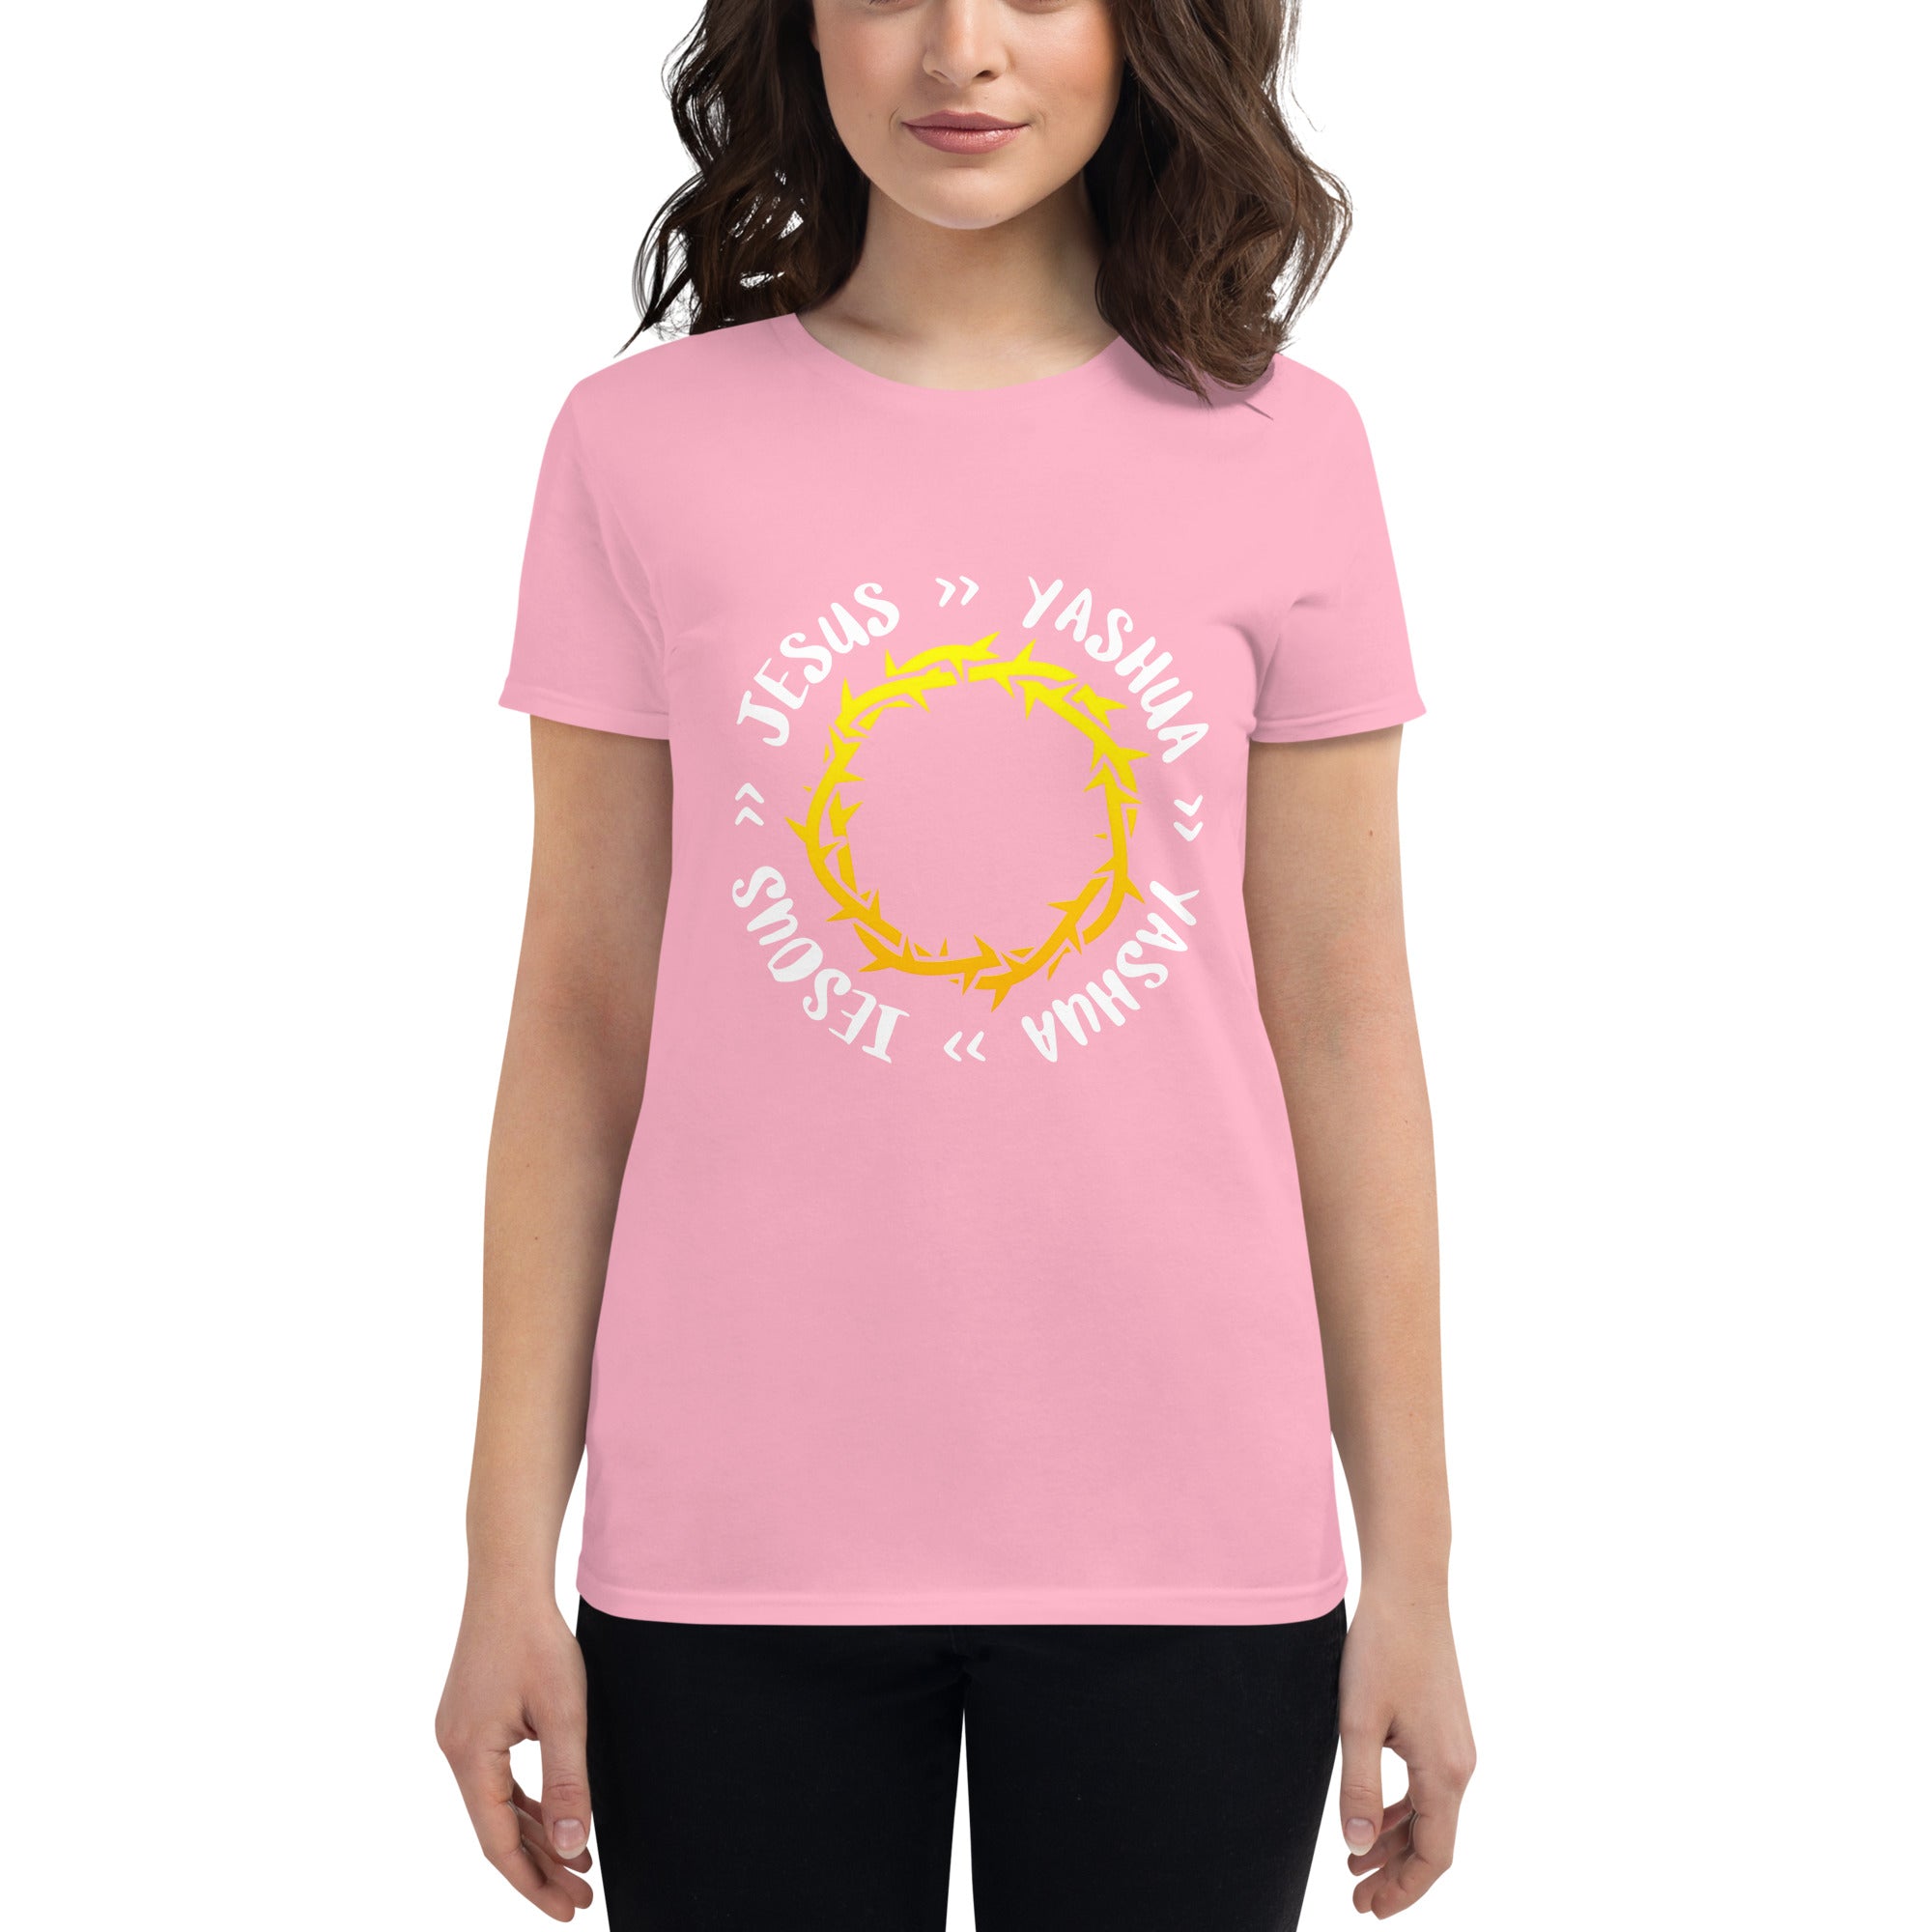 In His Name Women's short sleeve t-shirt